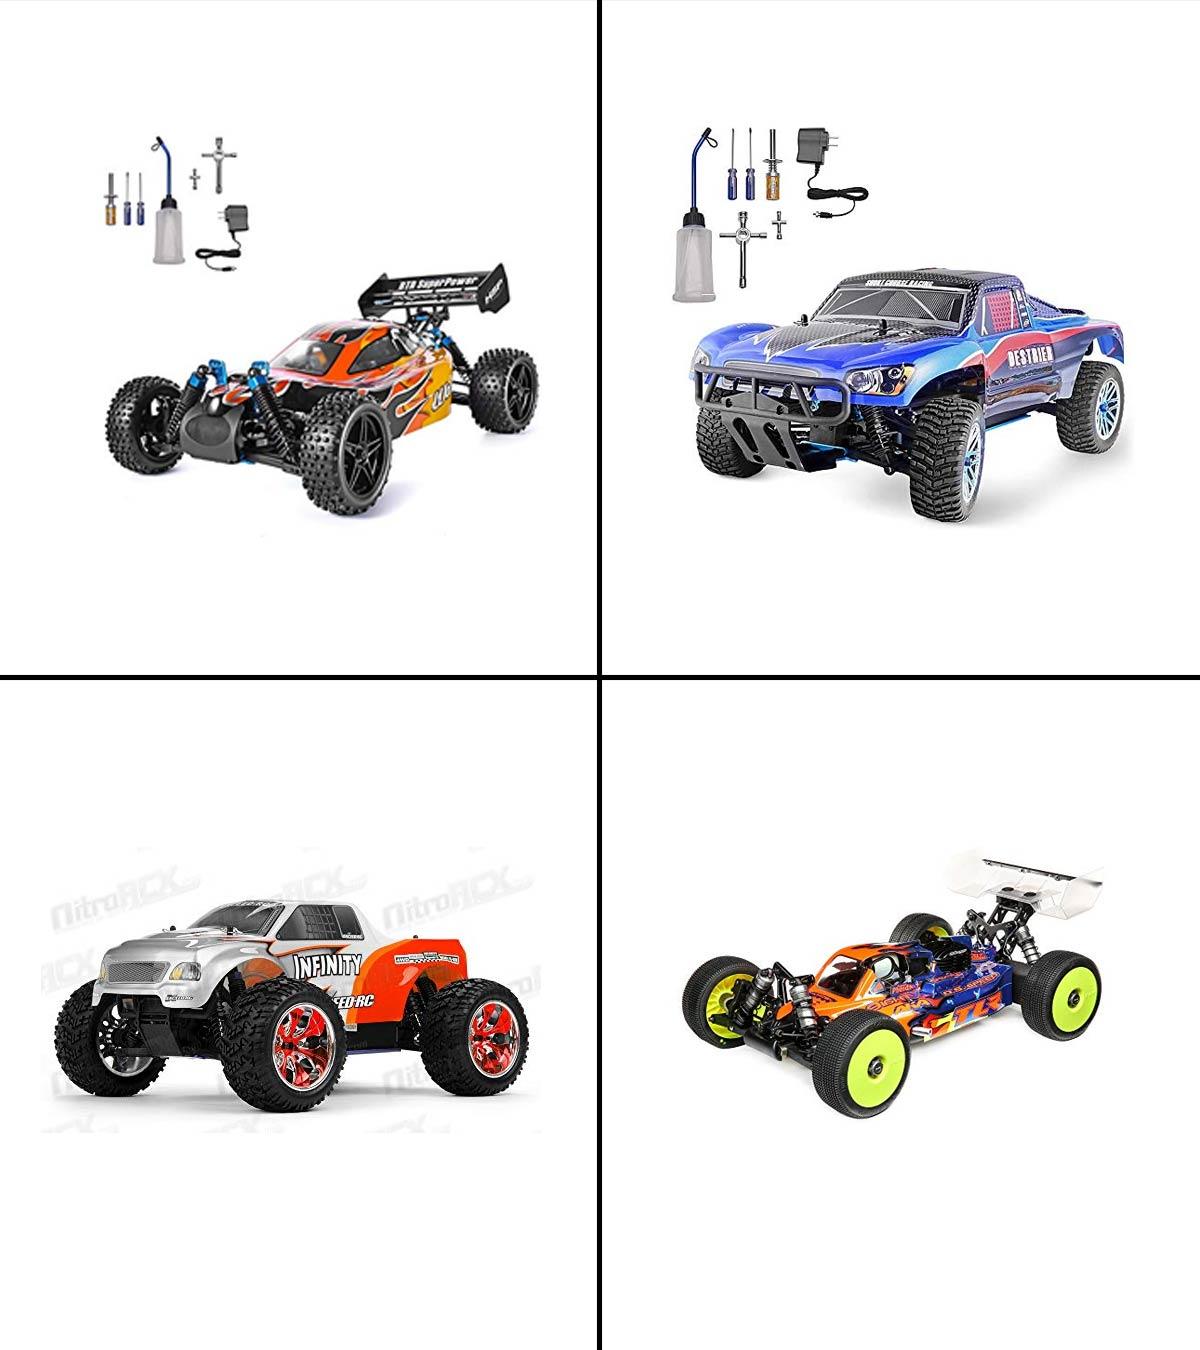 Rc Car Nitro 1/10:  Maximize Your RC Car's Performance and Handling with These Popular Upgrades